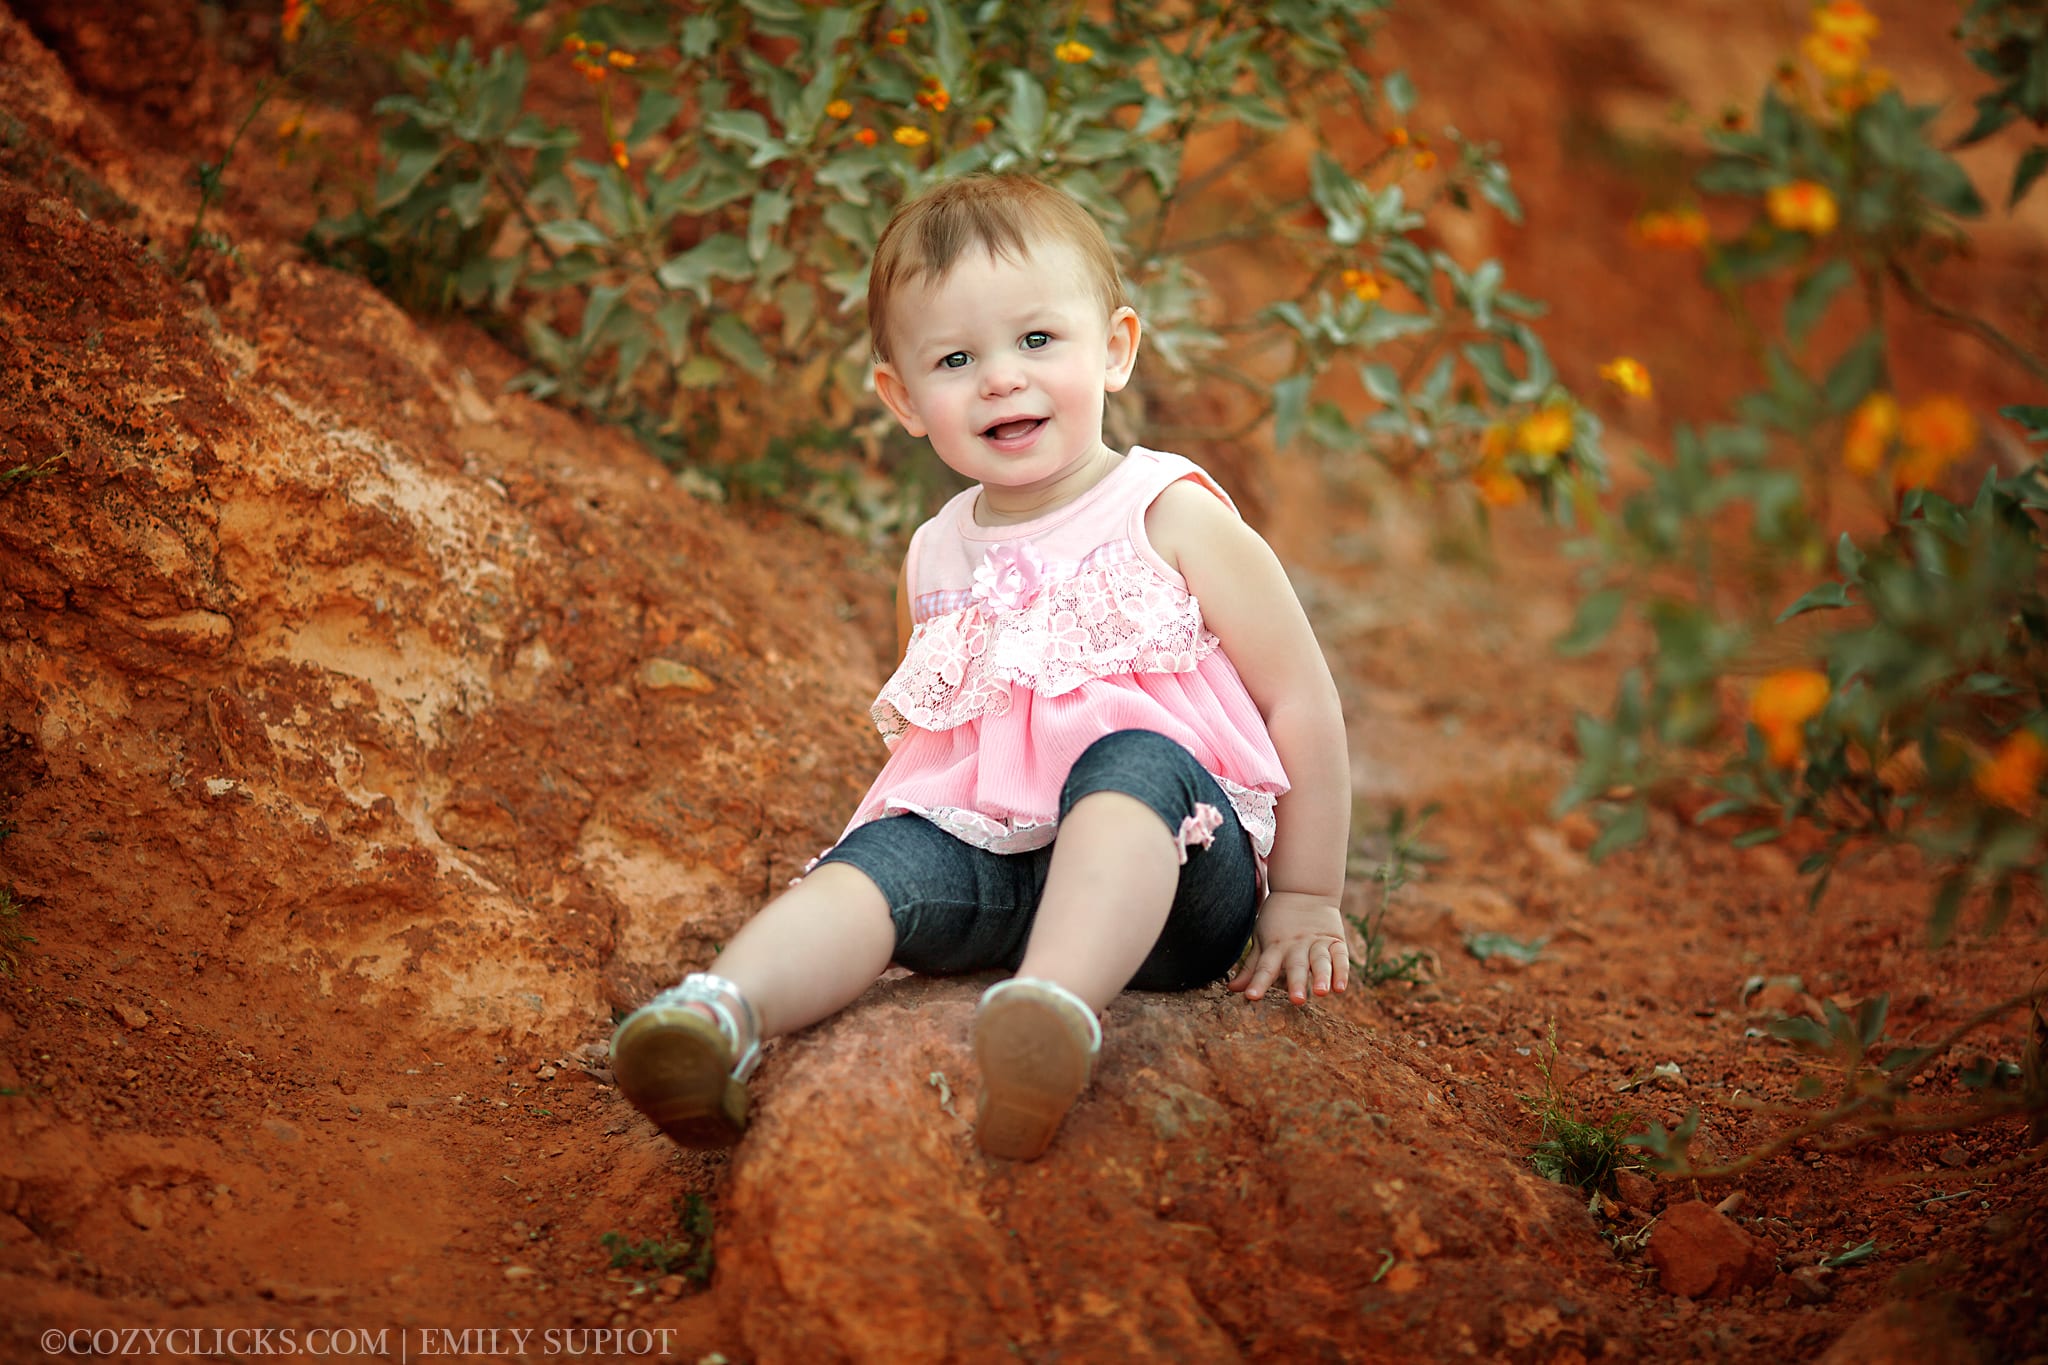 Toddler Children's Portrait taken in Phoenix with a red rock background and Arizona wildflowers